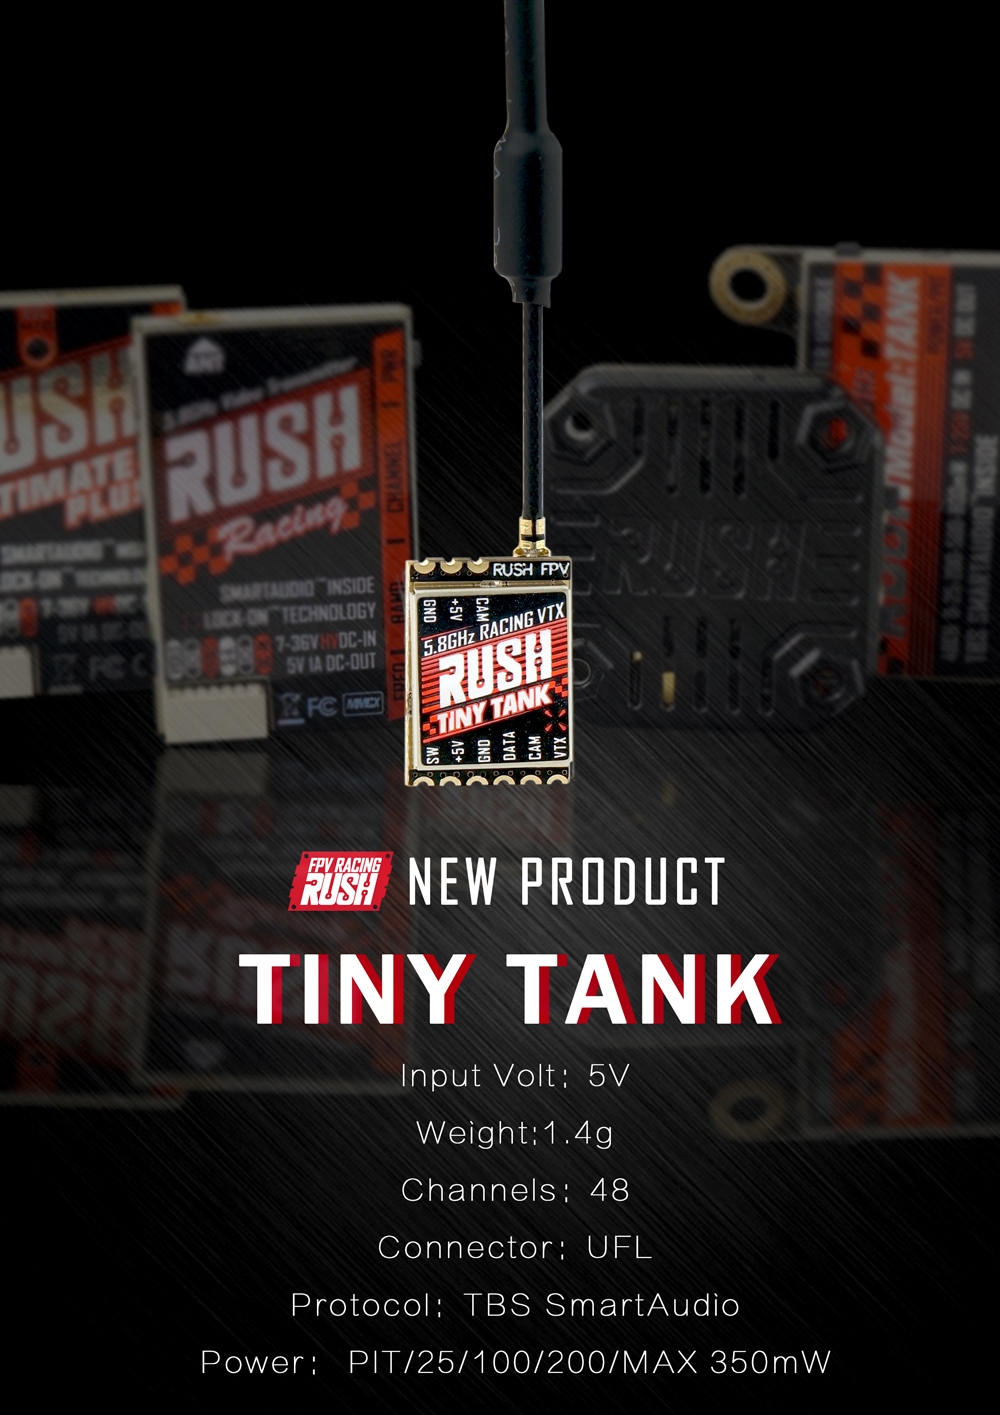 RUSH Tiny Tank 5.8GHz 48CH PIT/25/100/200/MAX 350mW TBS Smart Audio Racing VTX FPV Transmitter With Expansion Board Combo for RC Racer Drone